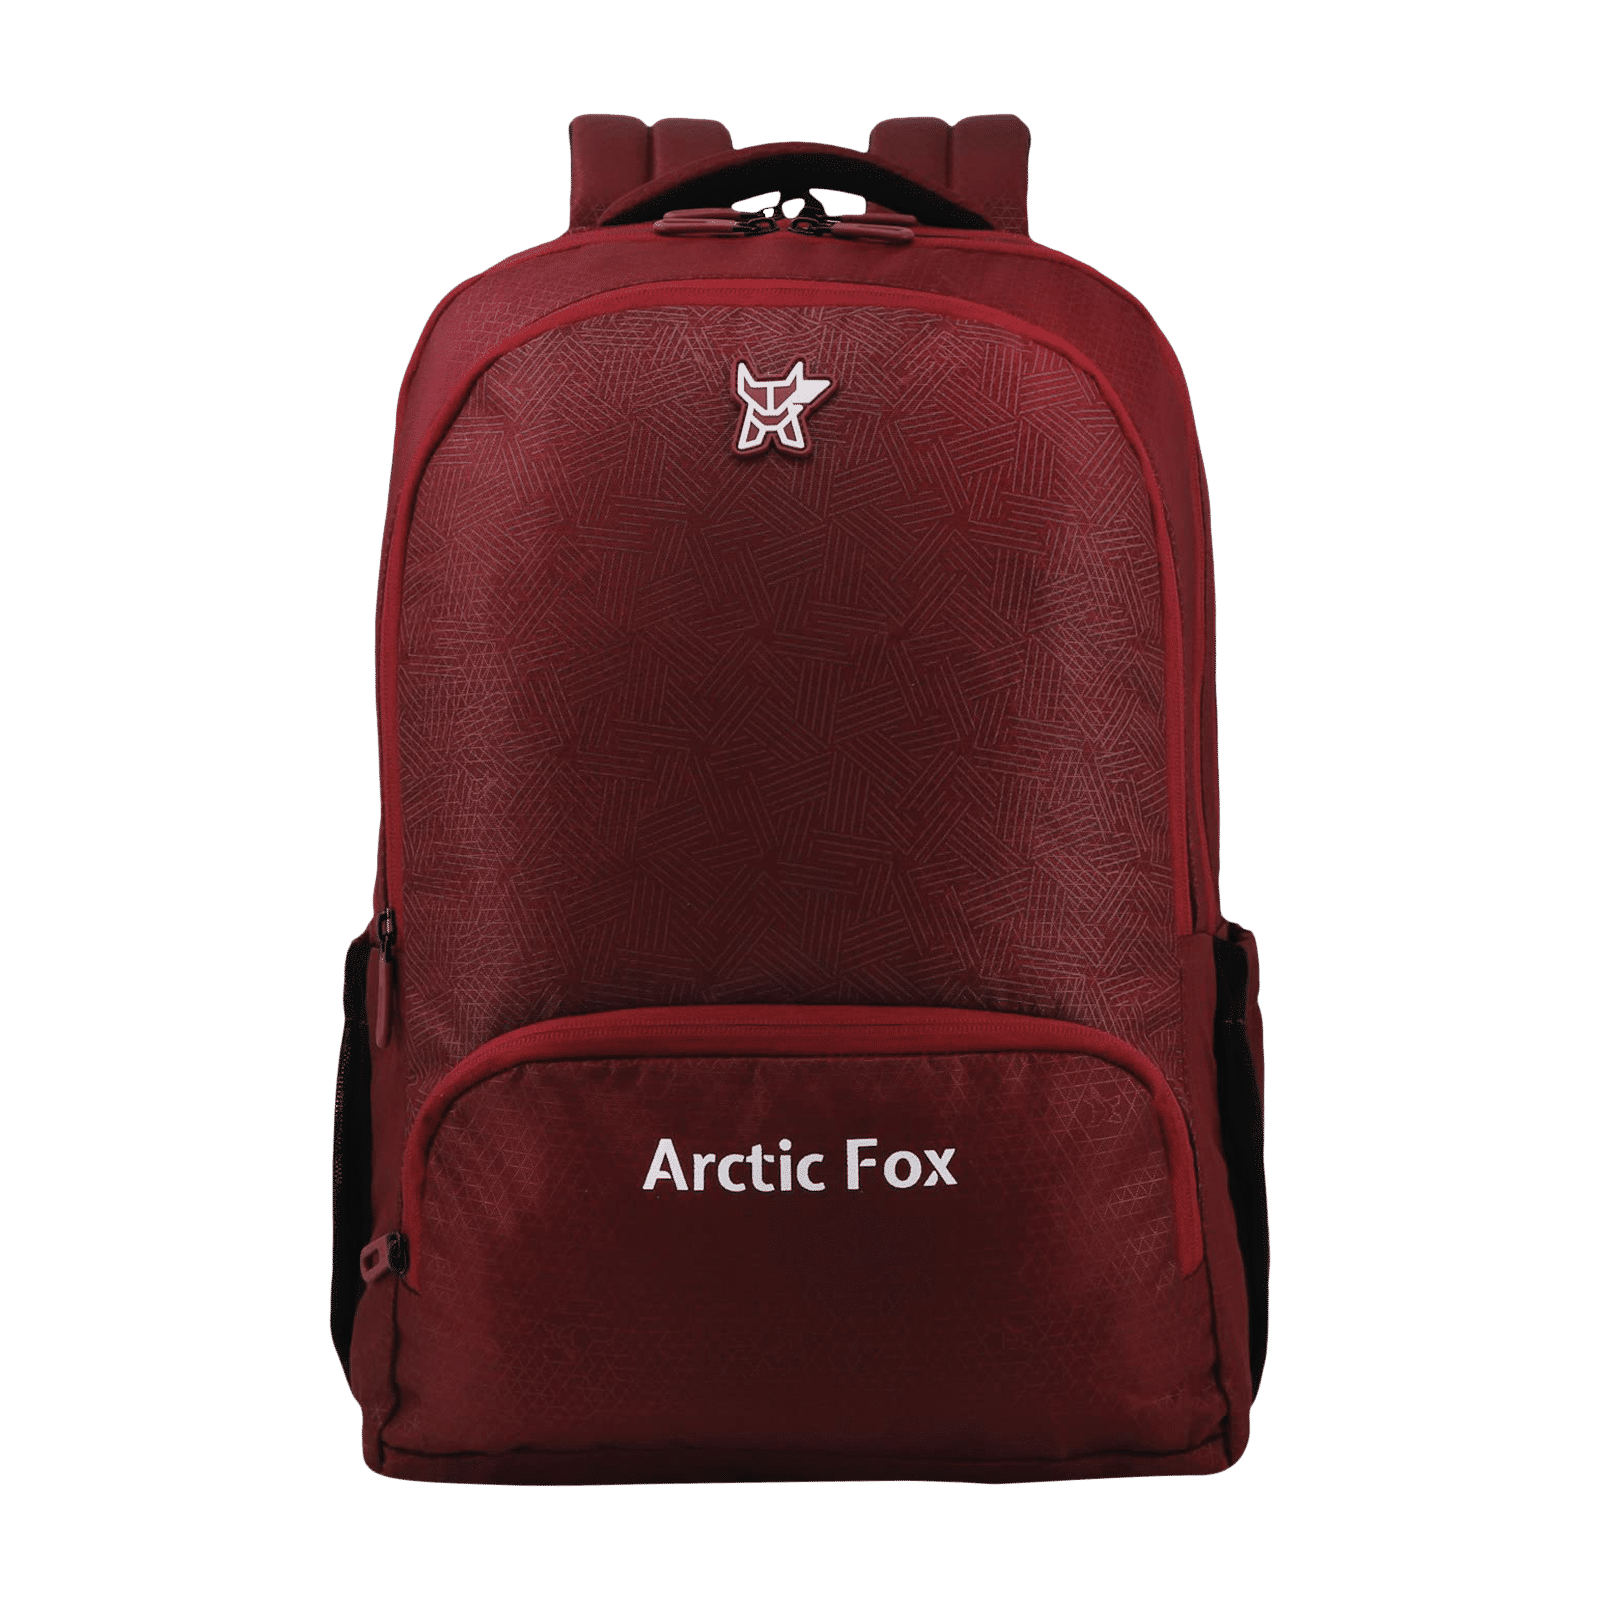 school accessories | Arctic Fox is a whole new world of Appa… | Flickr